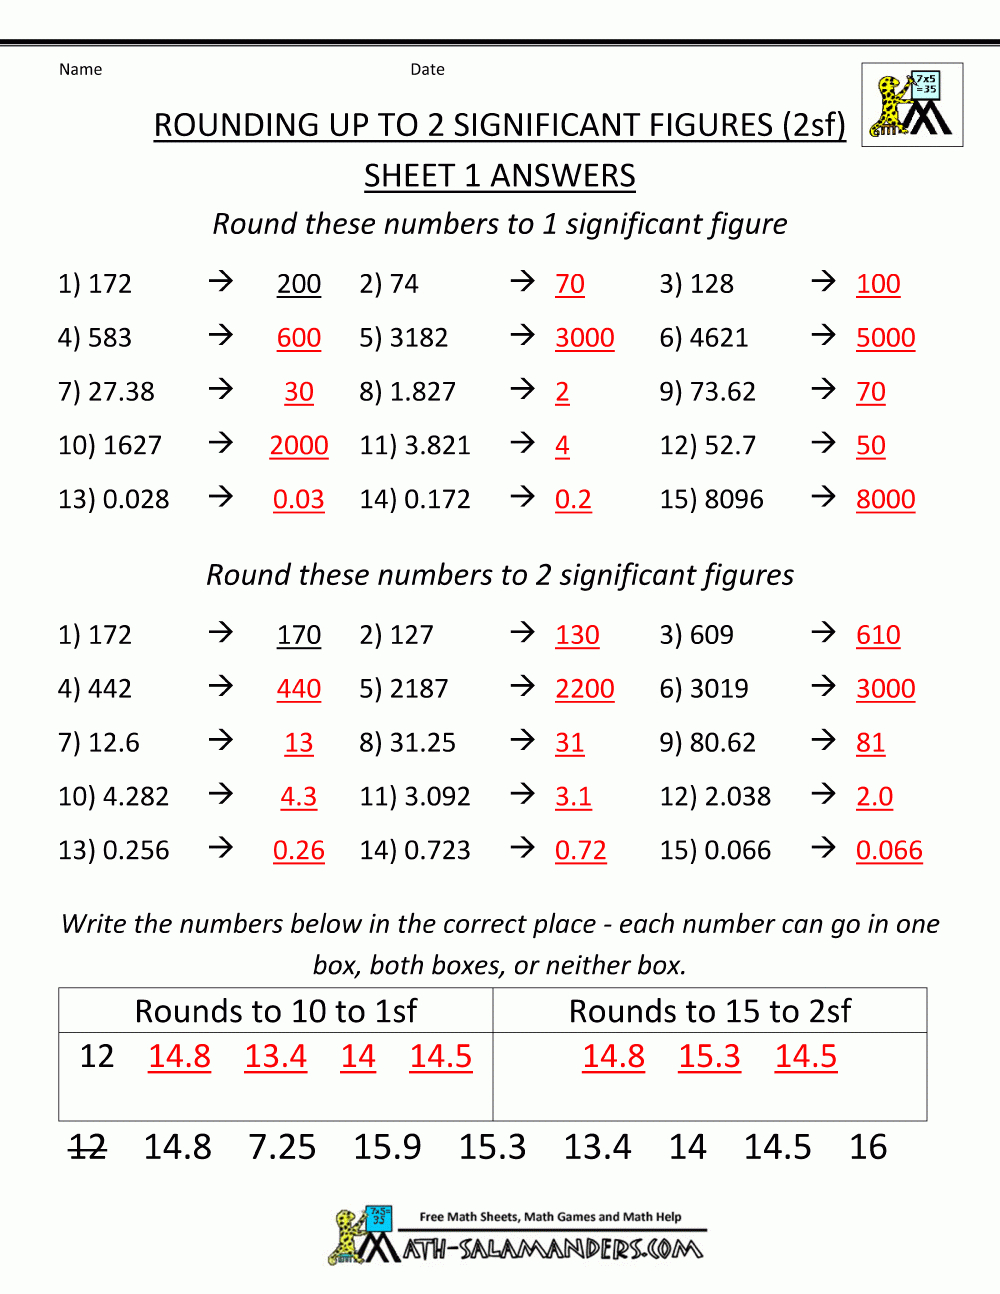 Rounding Significant Figures Intended For Significant Figures Worksheet Answers